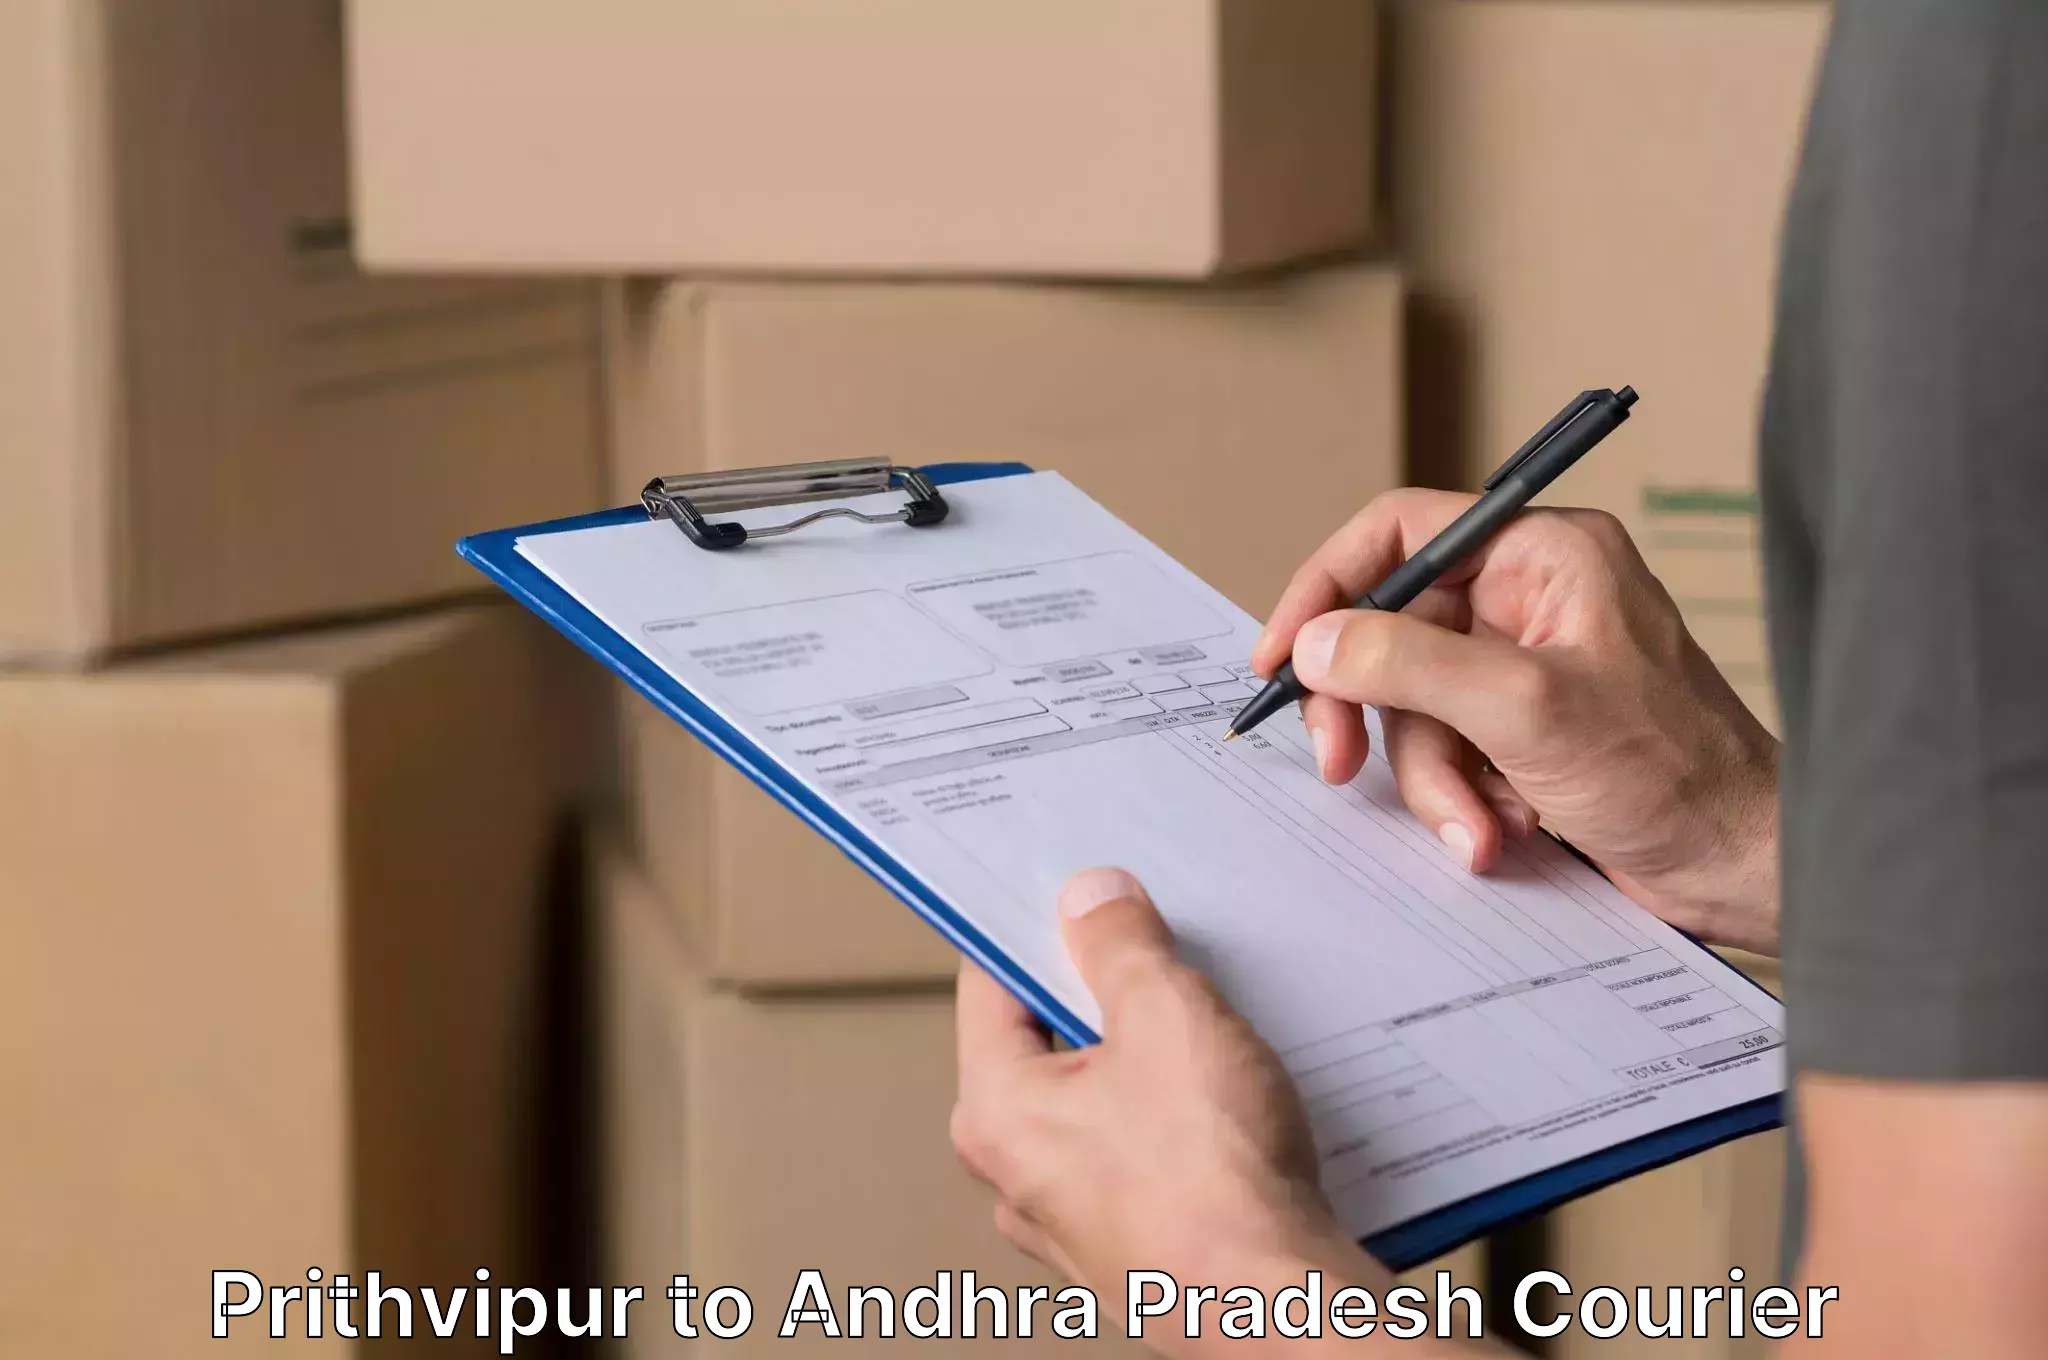 Furniture relocation services Prithvipur to Andhra Pradesh